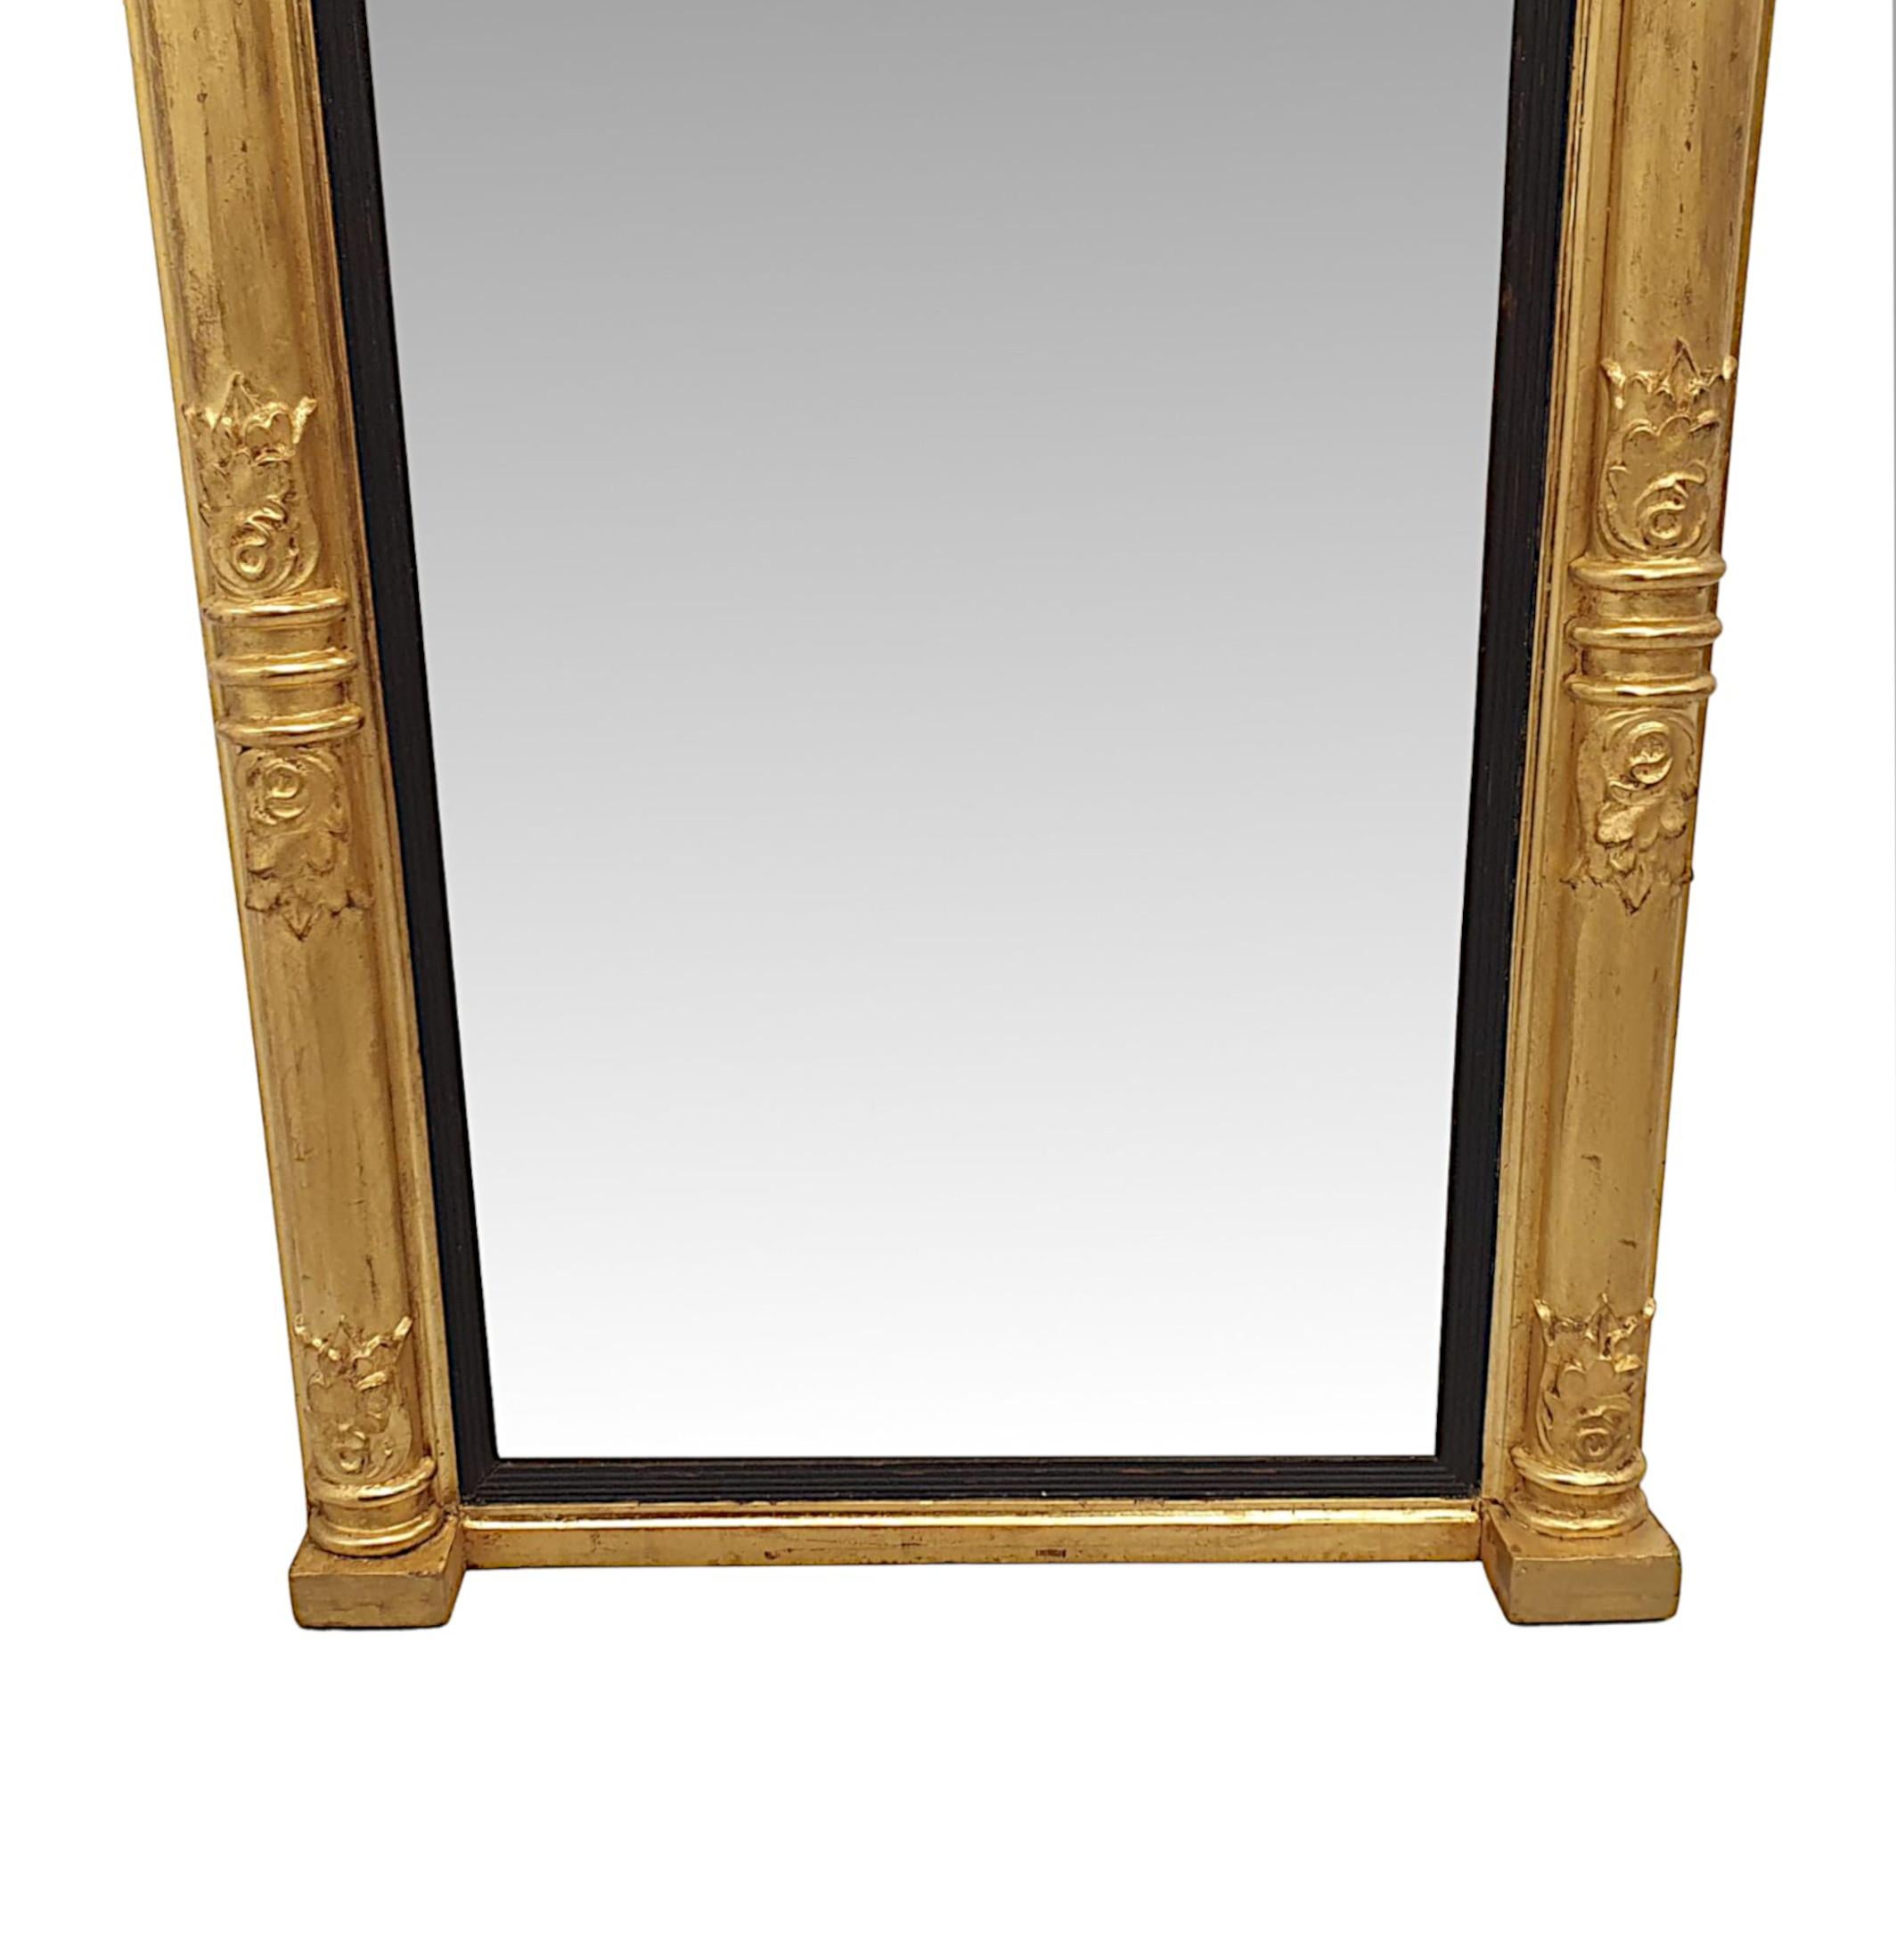 William IV A Very Rare Early 19th Century WillIam IV Giltwood Pier Mirror For Sale